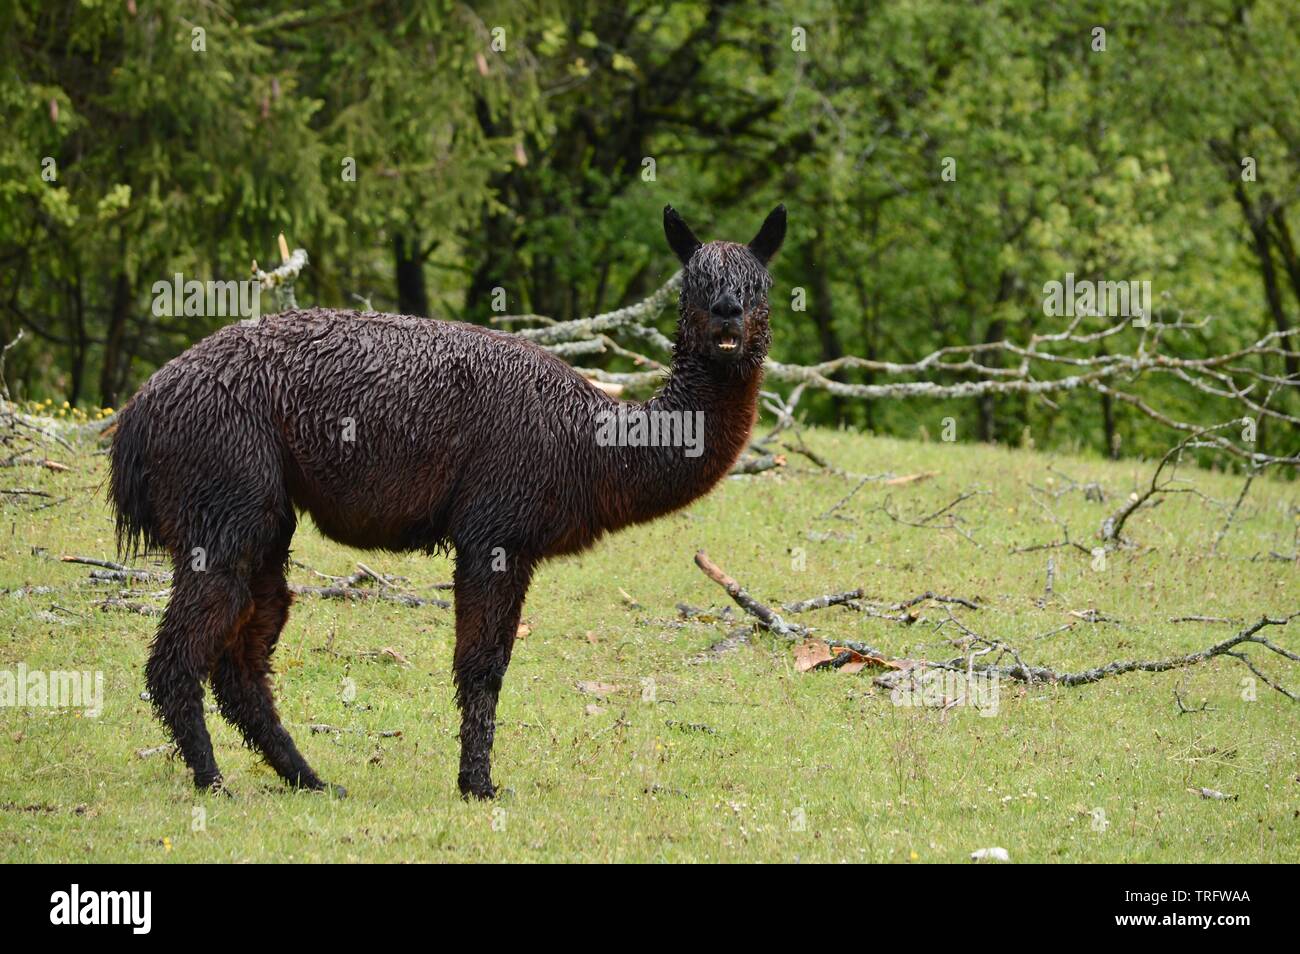 totally wet dark brown alpaca standing in the pouring rain waiting for better weather Stock Photo